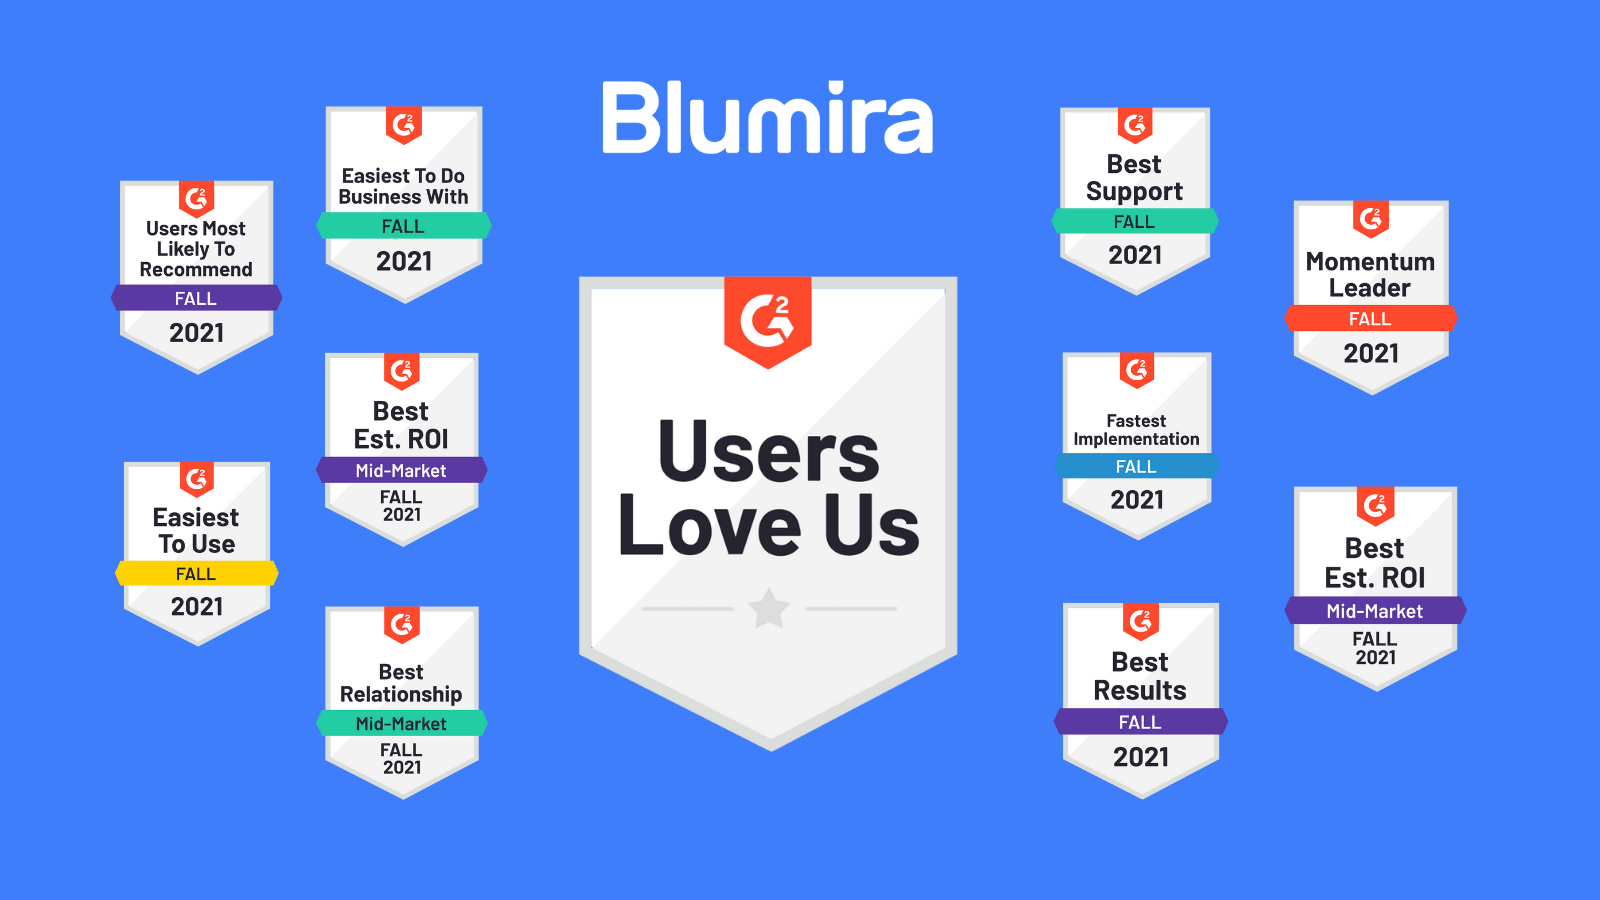 Blumira Leads G2’s Fall 2021 Momentum Report for SIEM, SOAR and IDPS